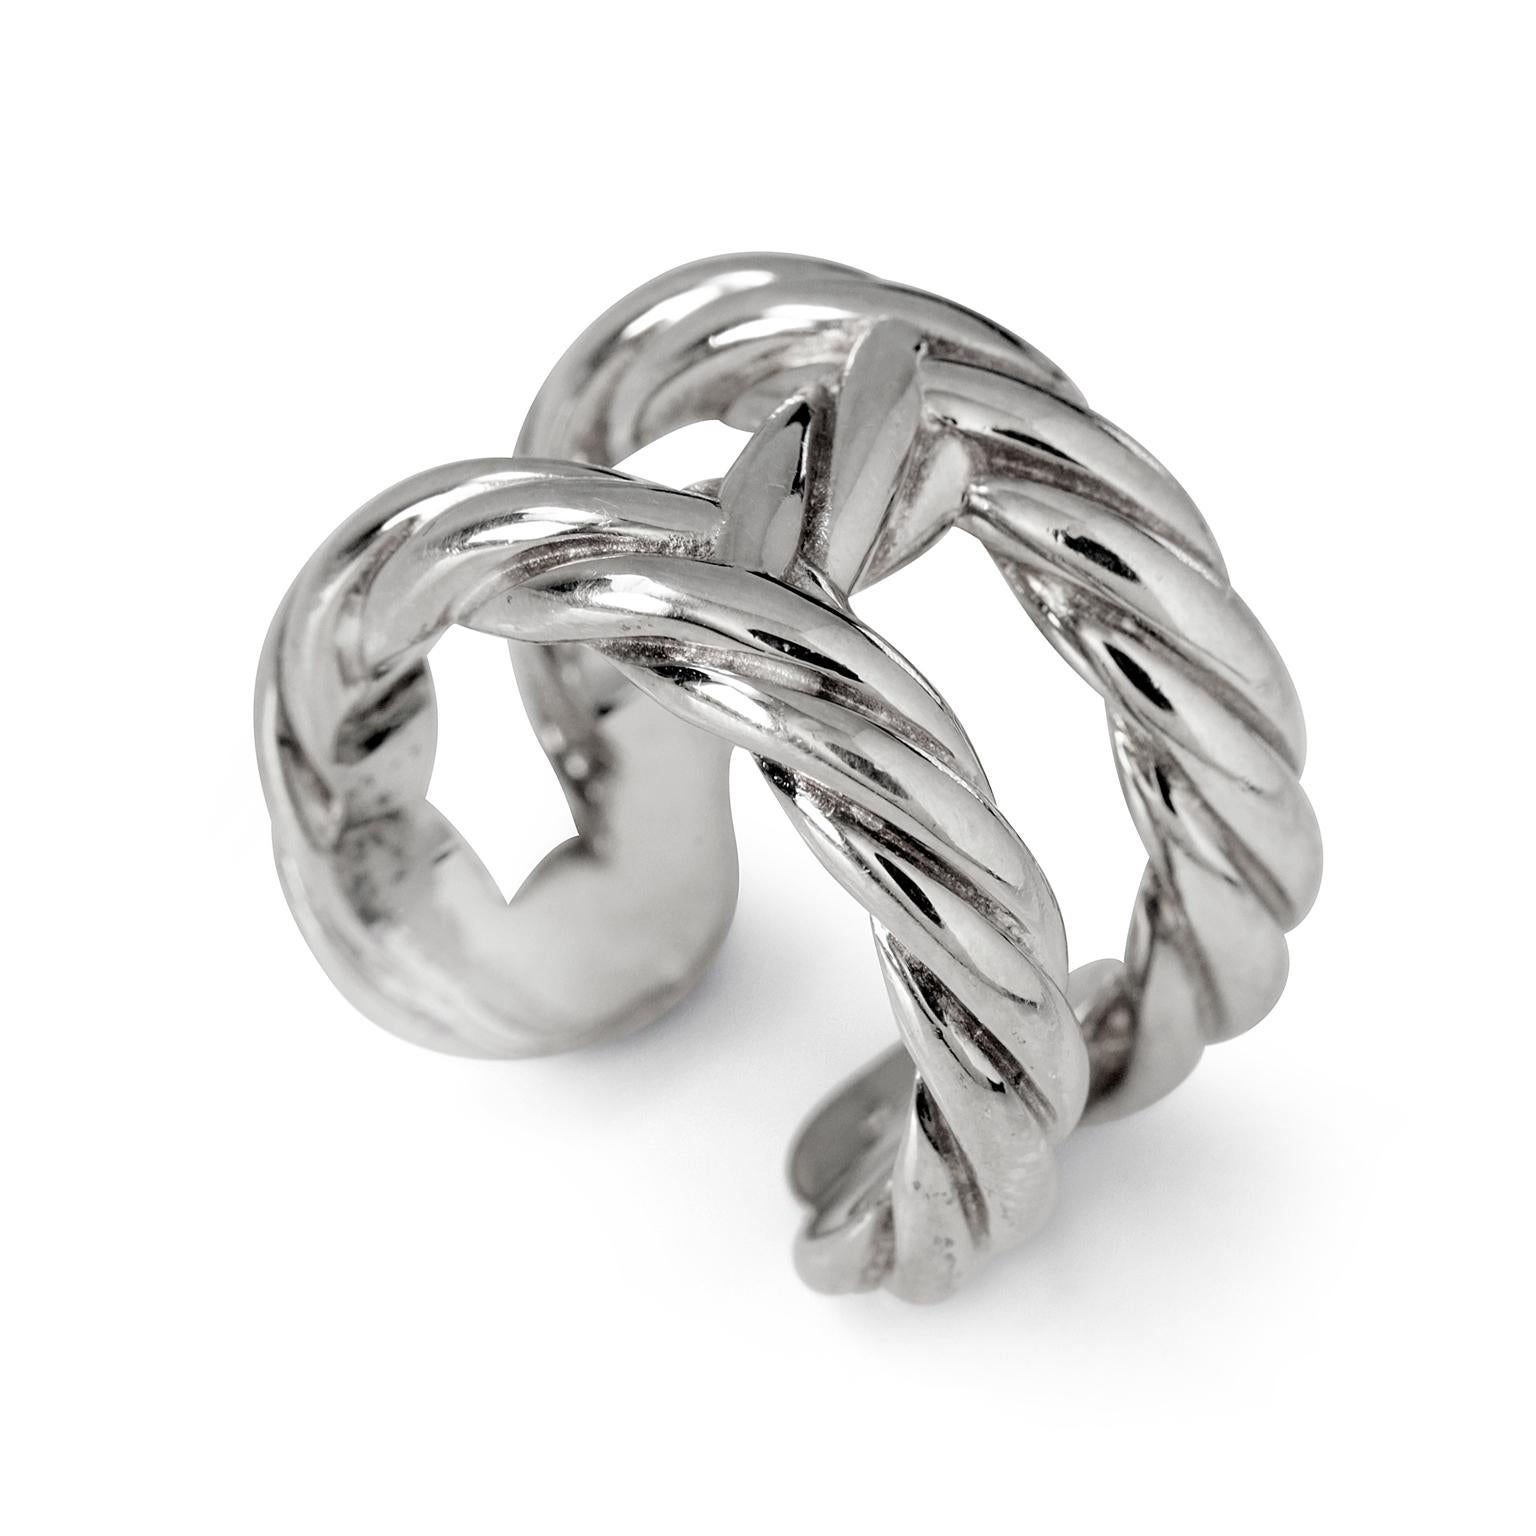 Hermès Silver Rope H Ring size 6.25 1